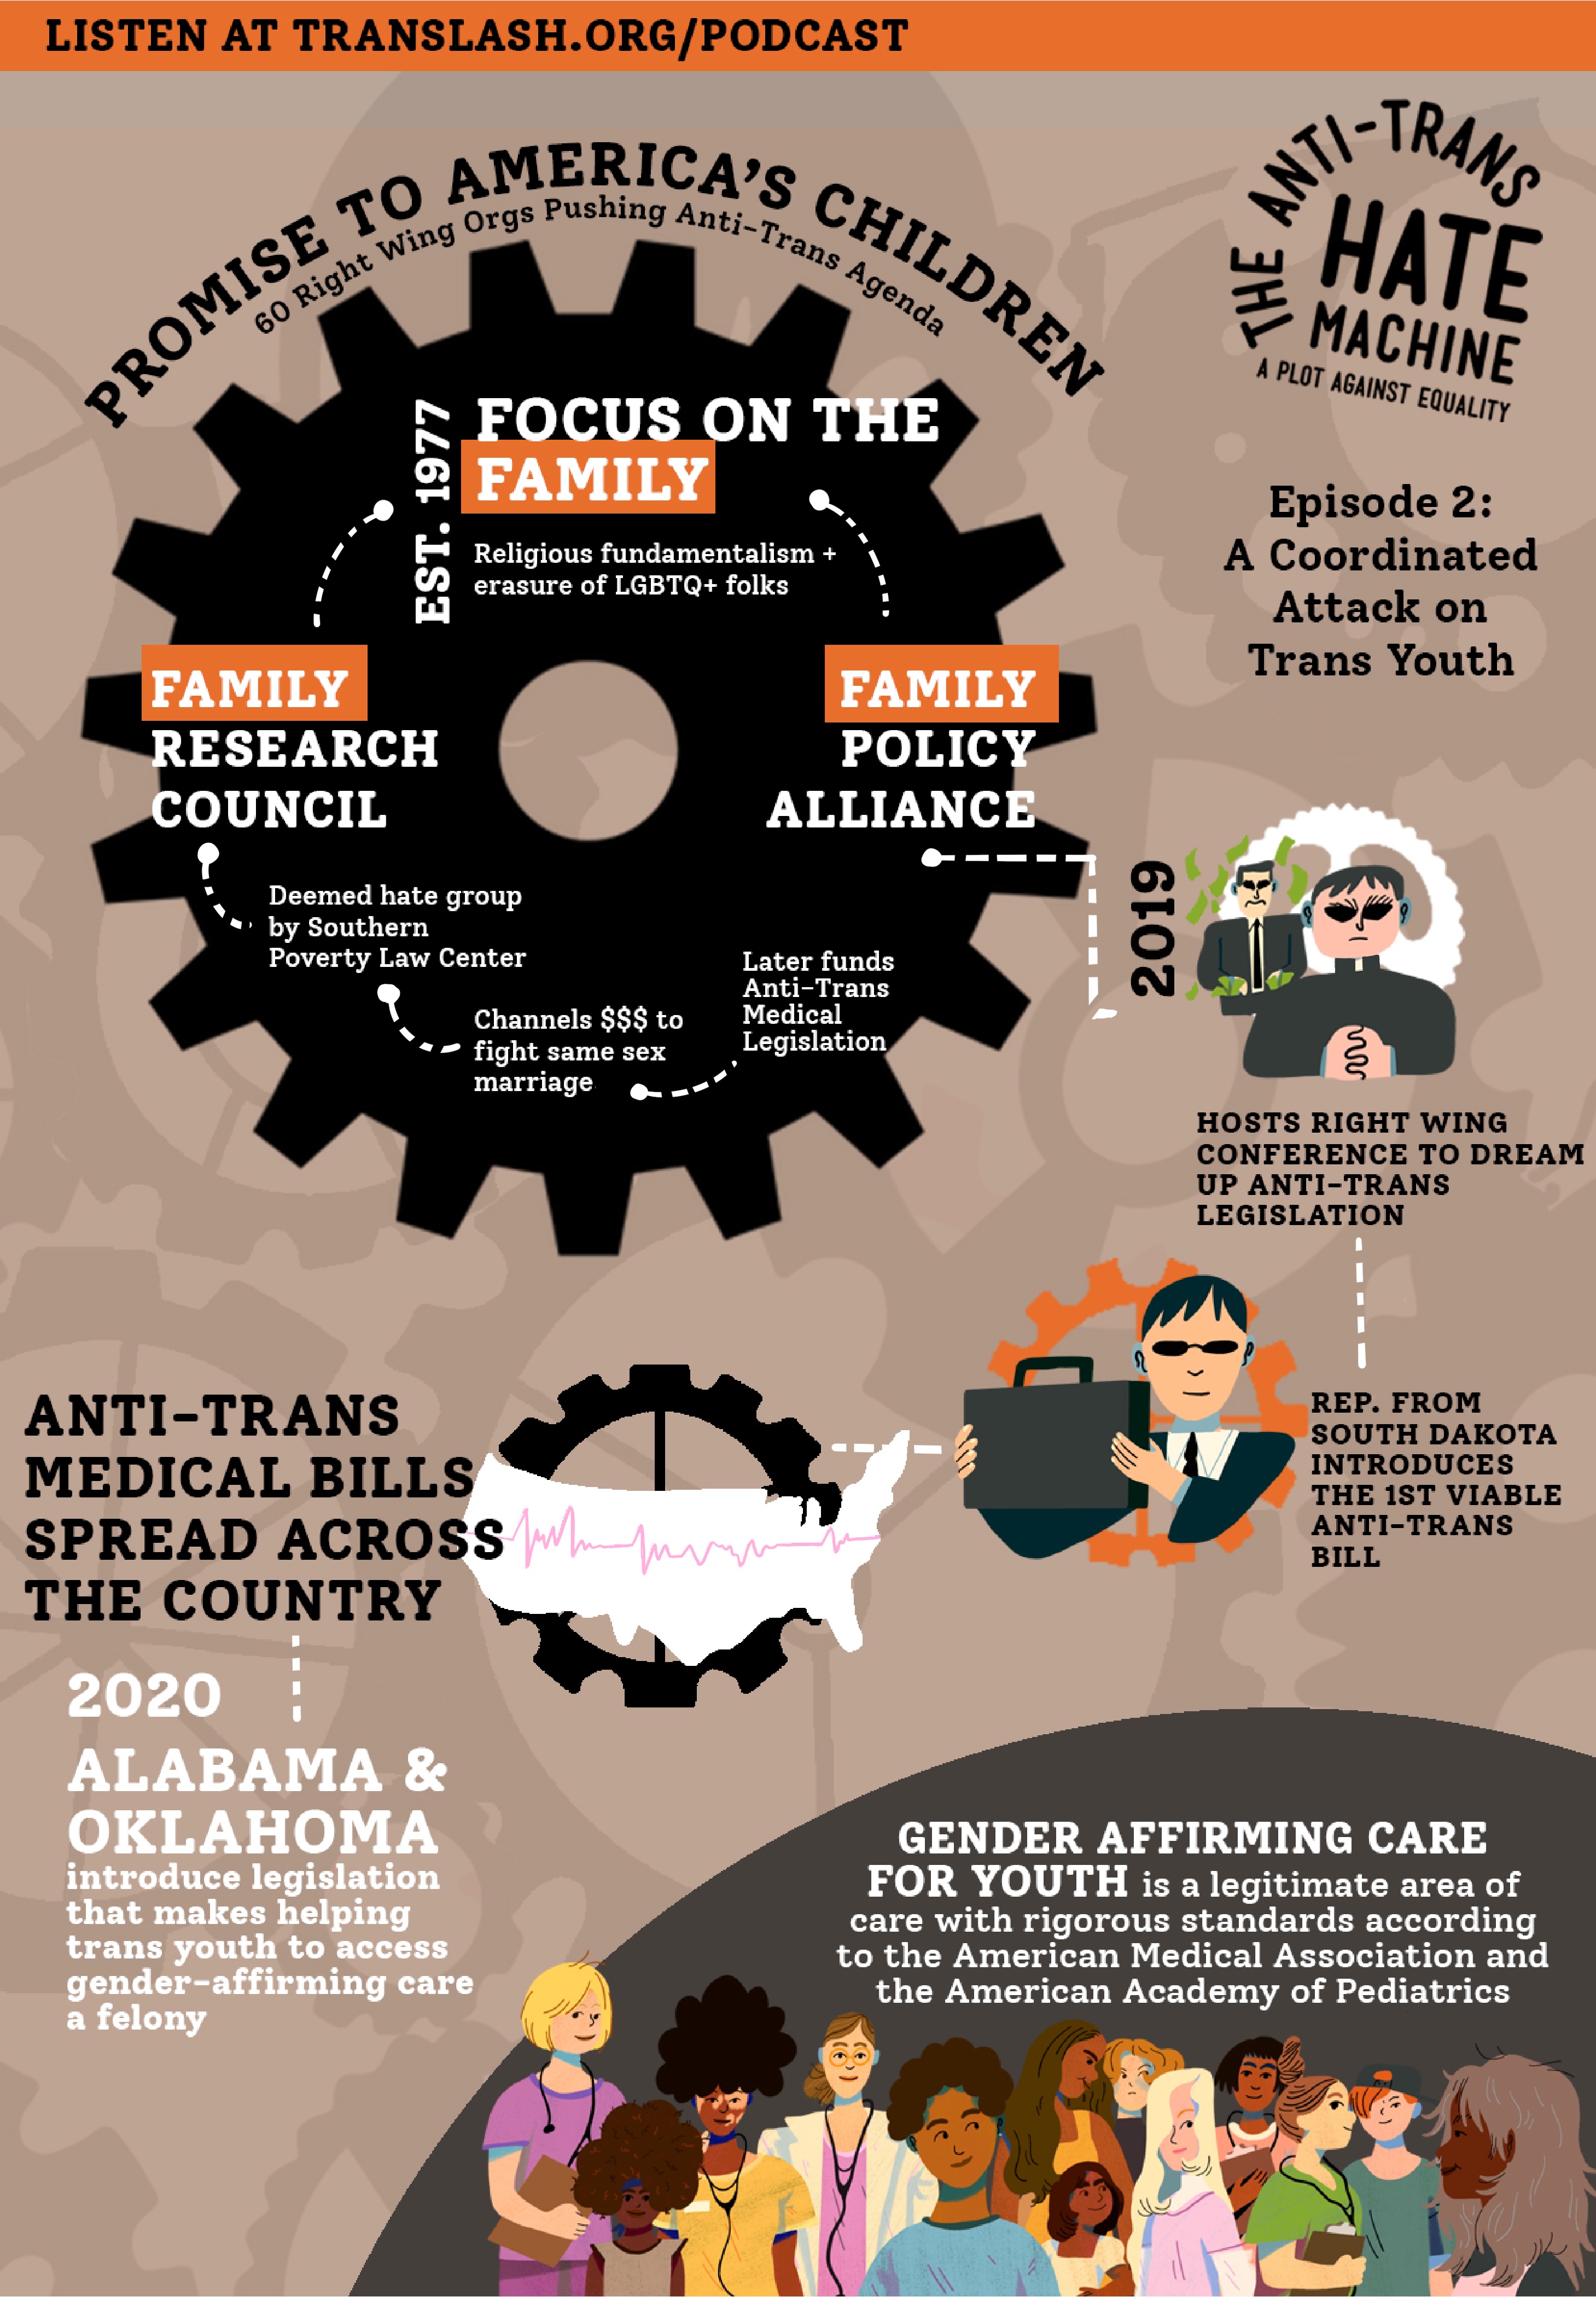 <span  class="uc_style_uc_tiles_grid_image_elementor_uc_items_attribute_title" style="color:#000000;">TRANSLASH PODCAST EP2 INFOGRAPHIC 2</span>